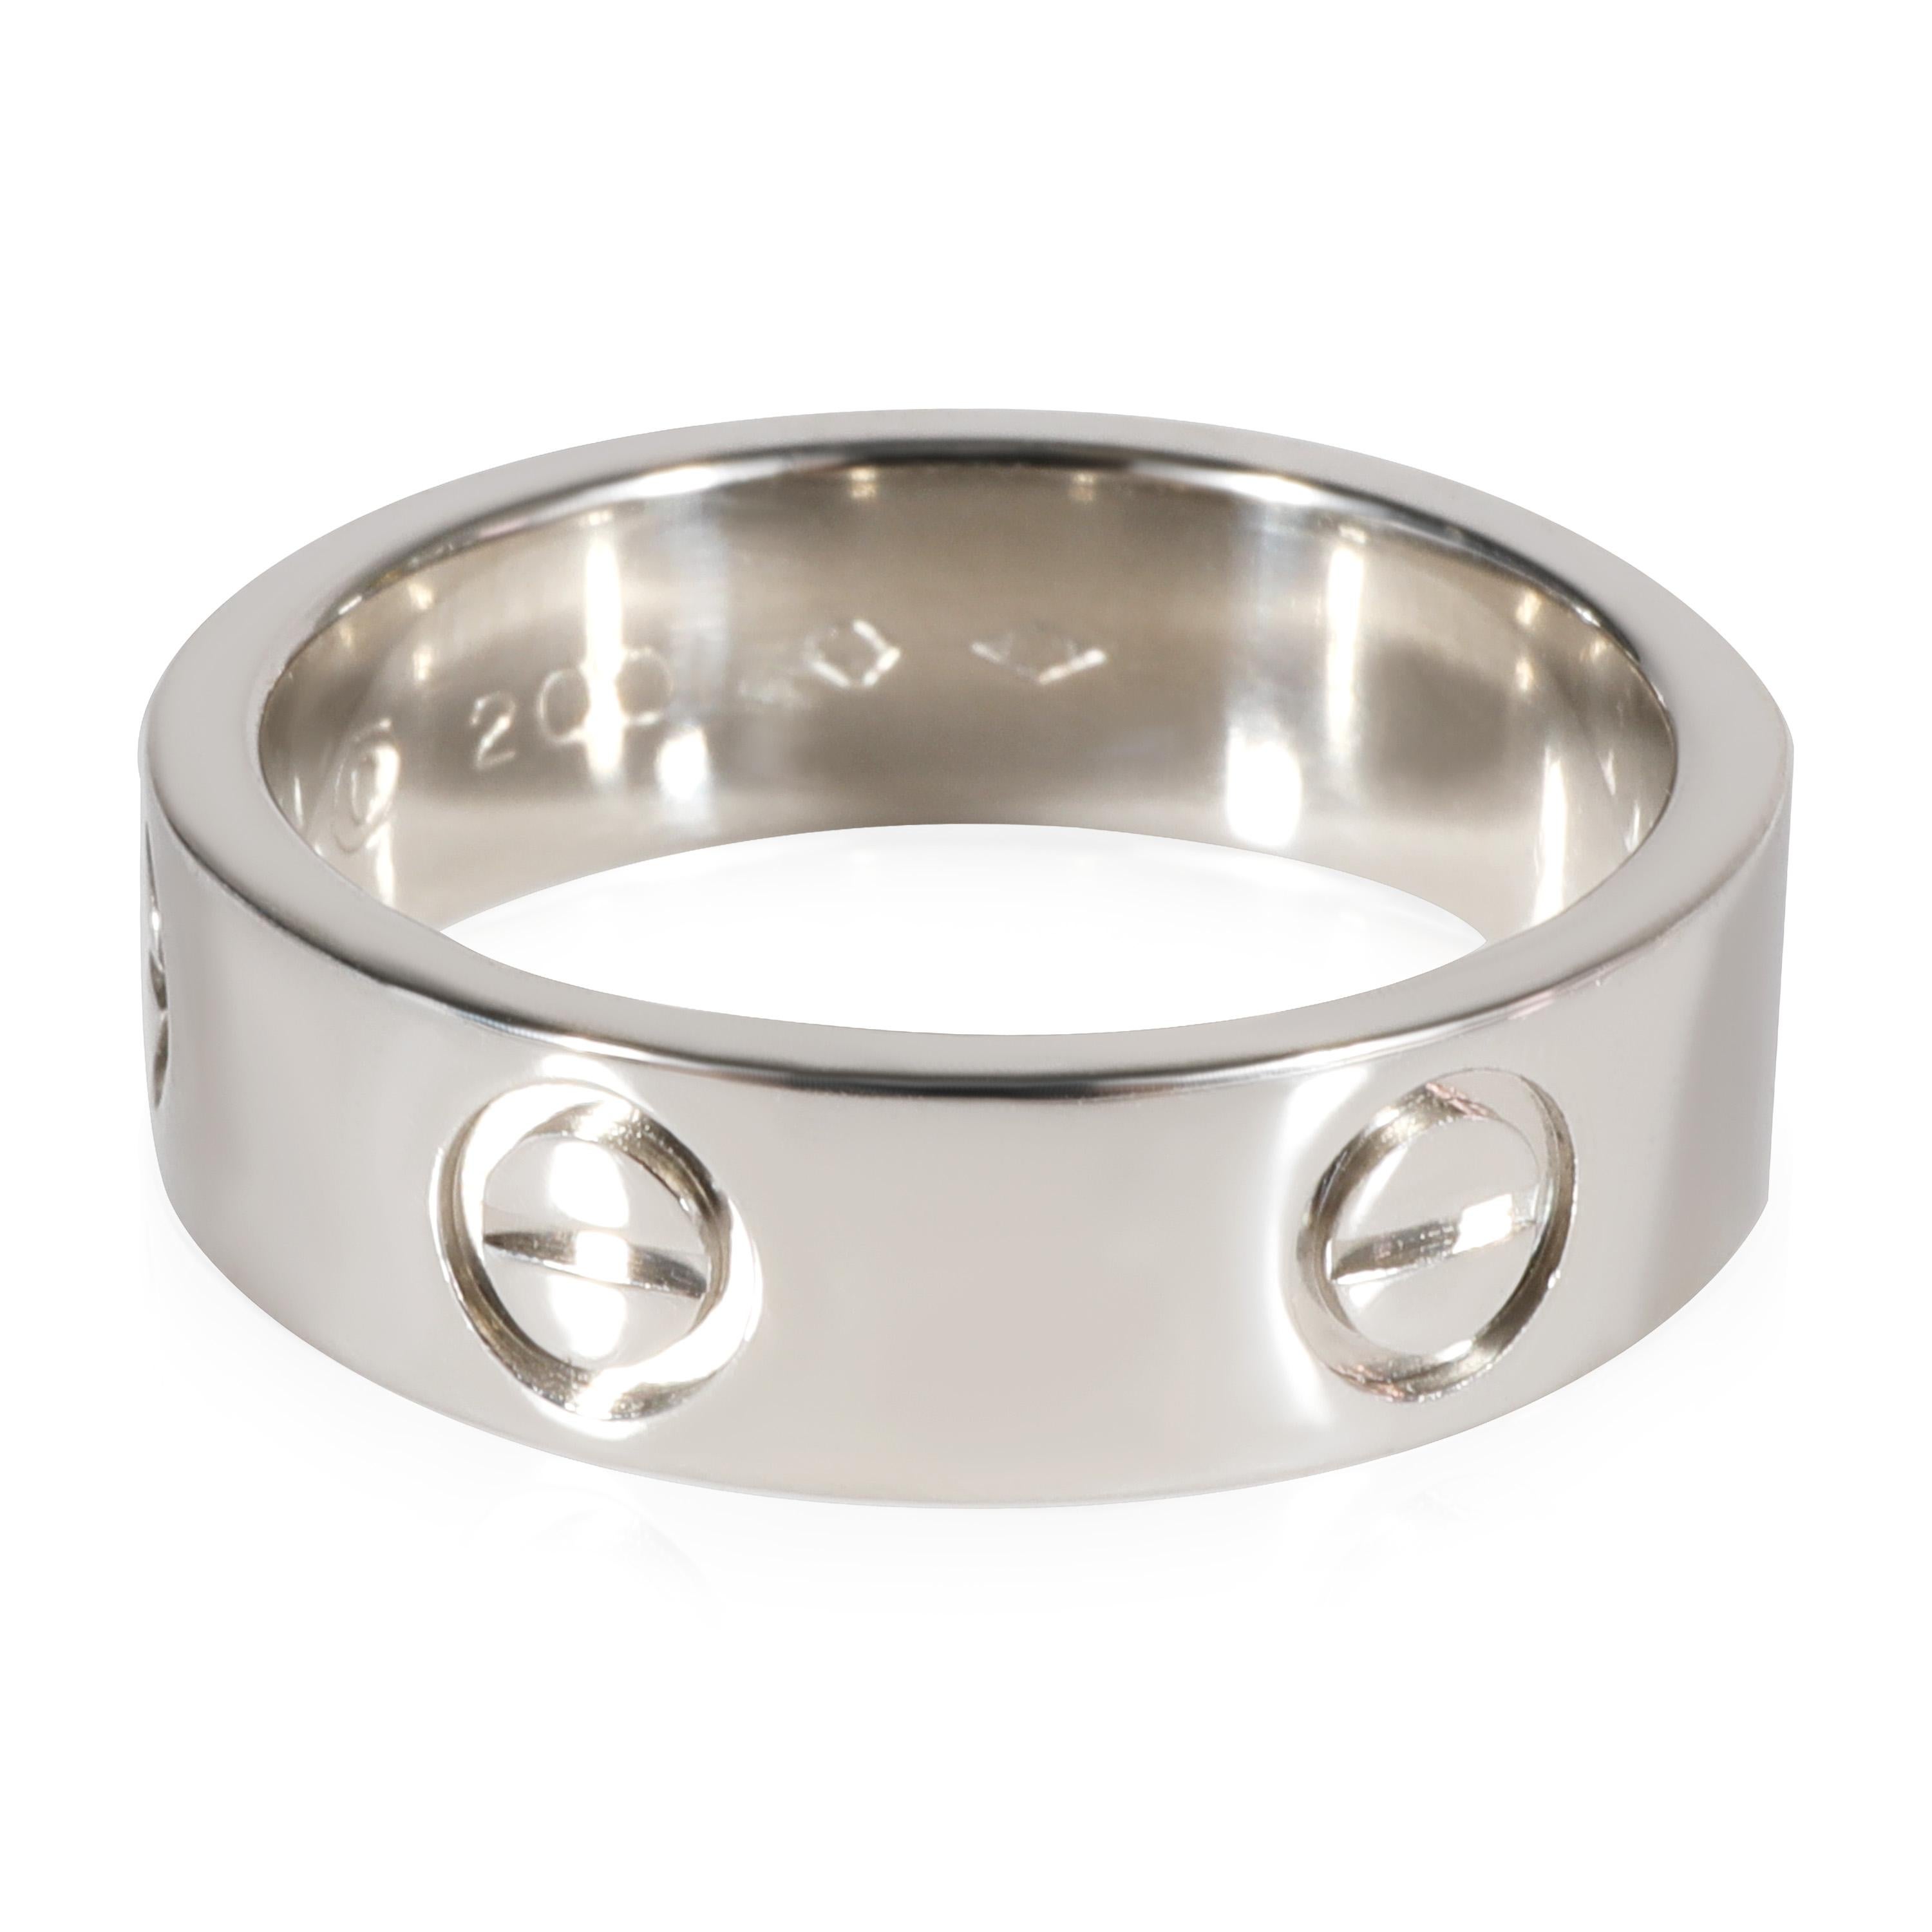 Cartier Love Ring in Platinum

PRIMARY DETAILS
SKU: 123199
Listing Title: Cartier Love Ring in Platinum
Condition Description: Retails for 4000 USD. In excellent condition. Ring size is 6. Cartier size 52.
Brand: Cartier
Collection/Series: